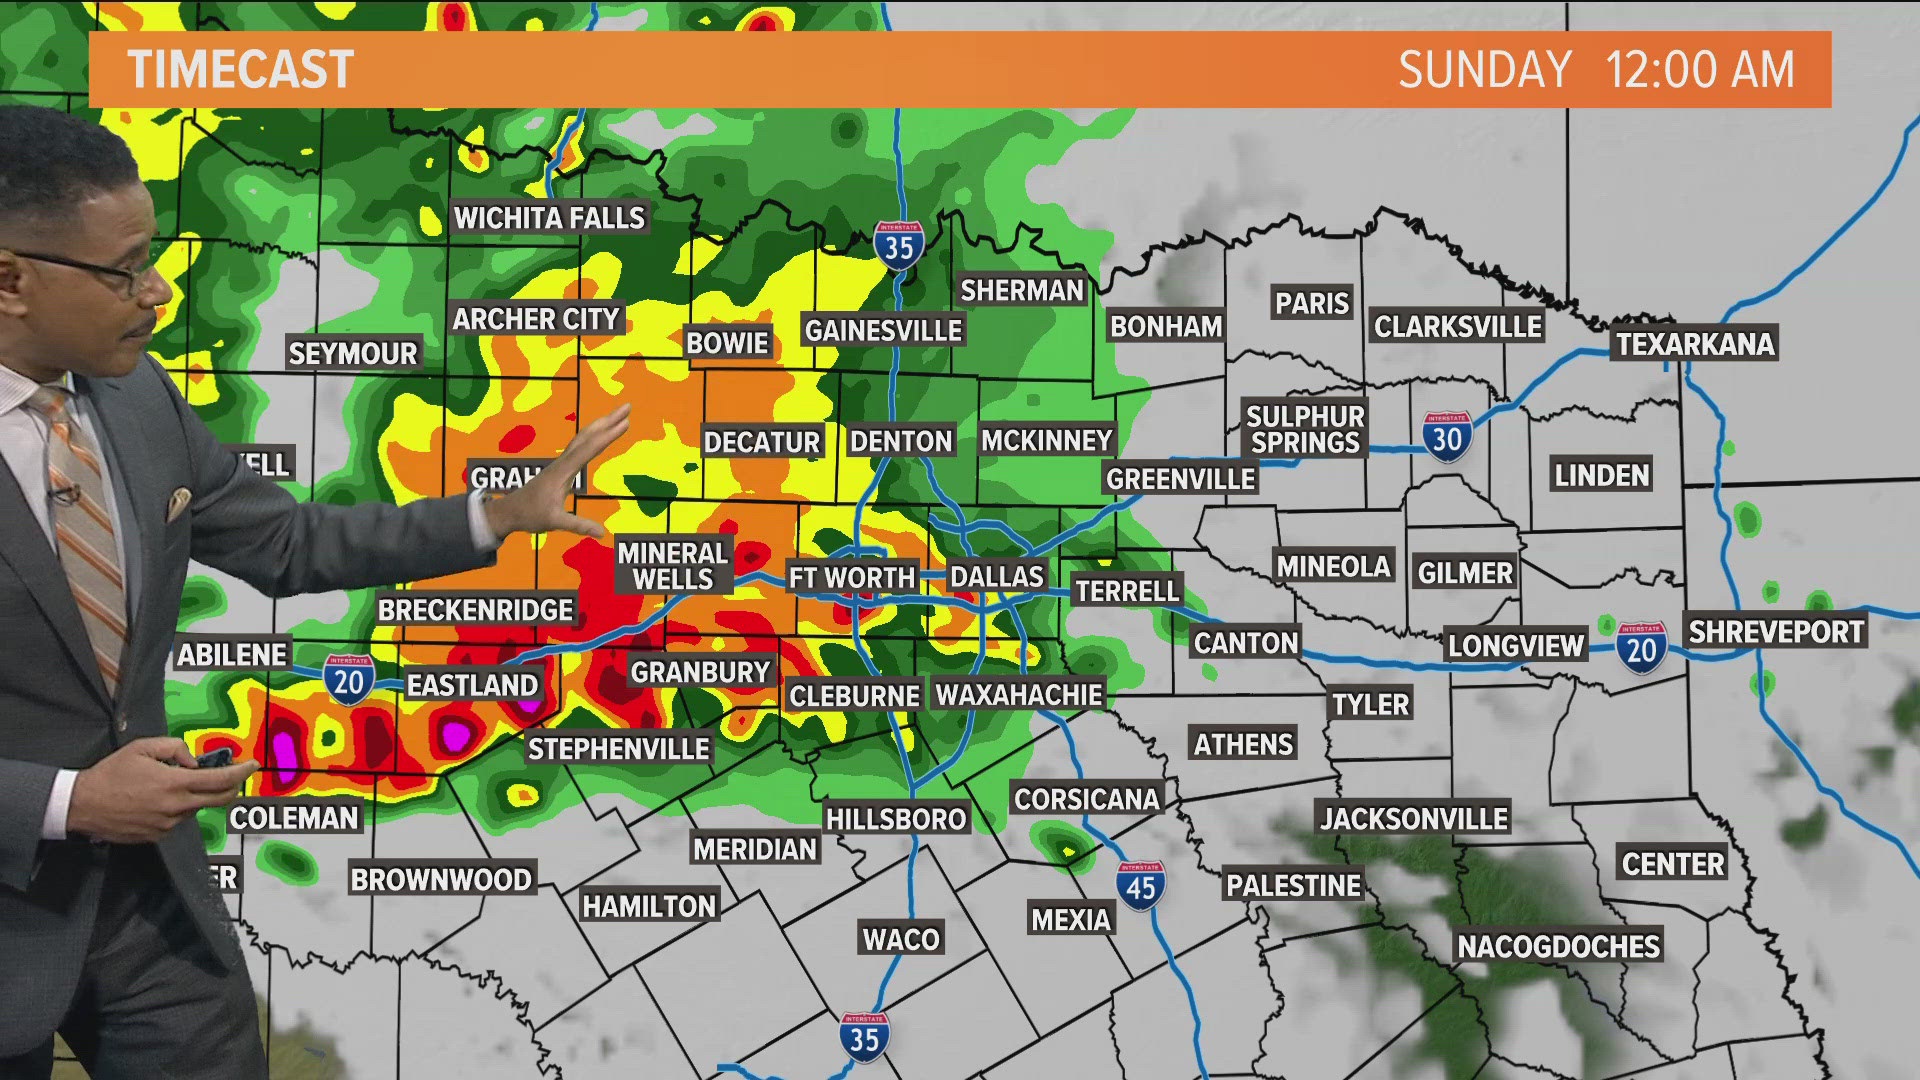 Greg Fields has a look at multiple rounds of storms and rain in North Texas this weekend.